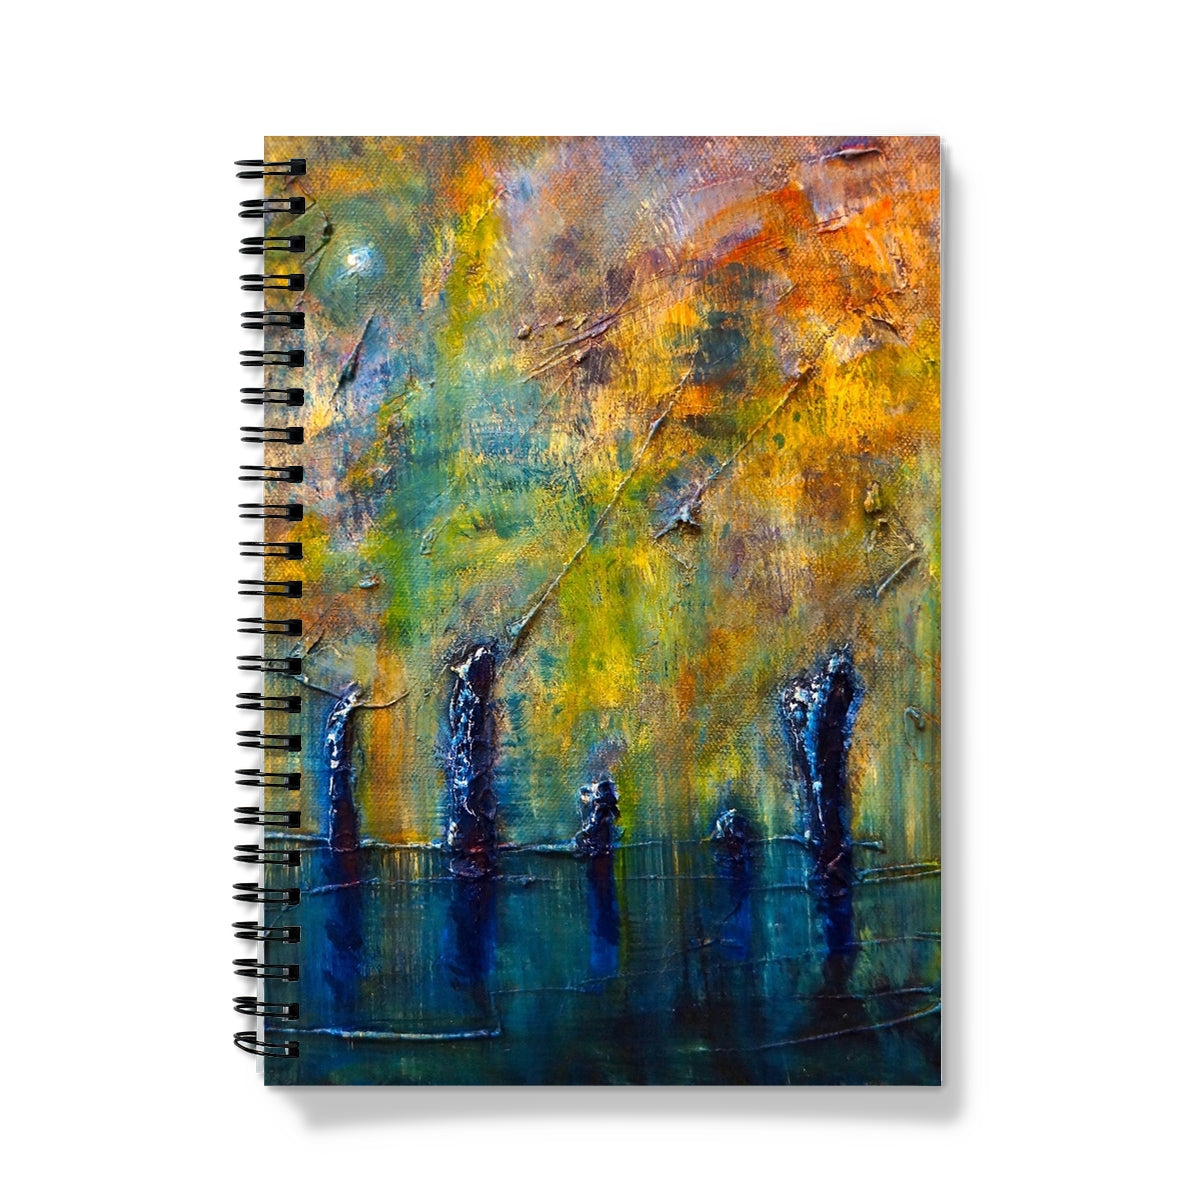 Stenness Moonlight Orkney Art Gifts Notebook-Journals & Notebooks-Orkney Art Gallery-A5-Lined-Paintings, Prints, Homeware, Art Gifts From Scotland By Scottish Artist Kevin Hunter